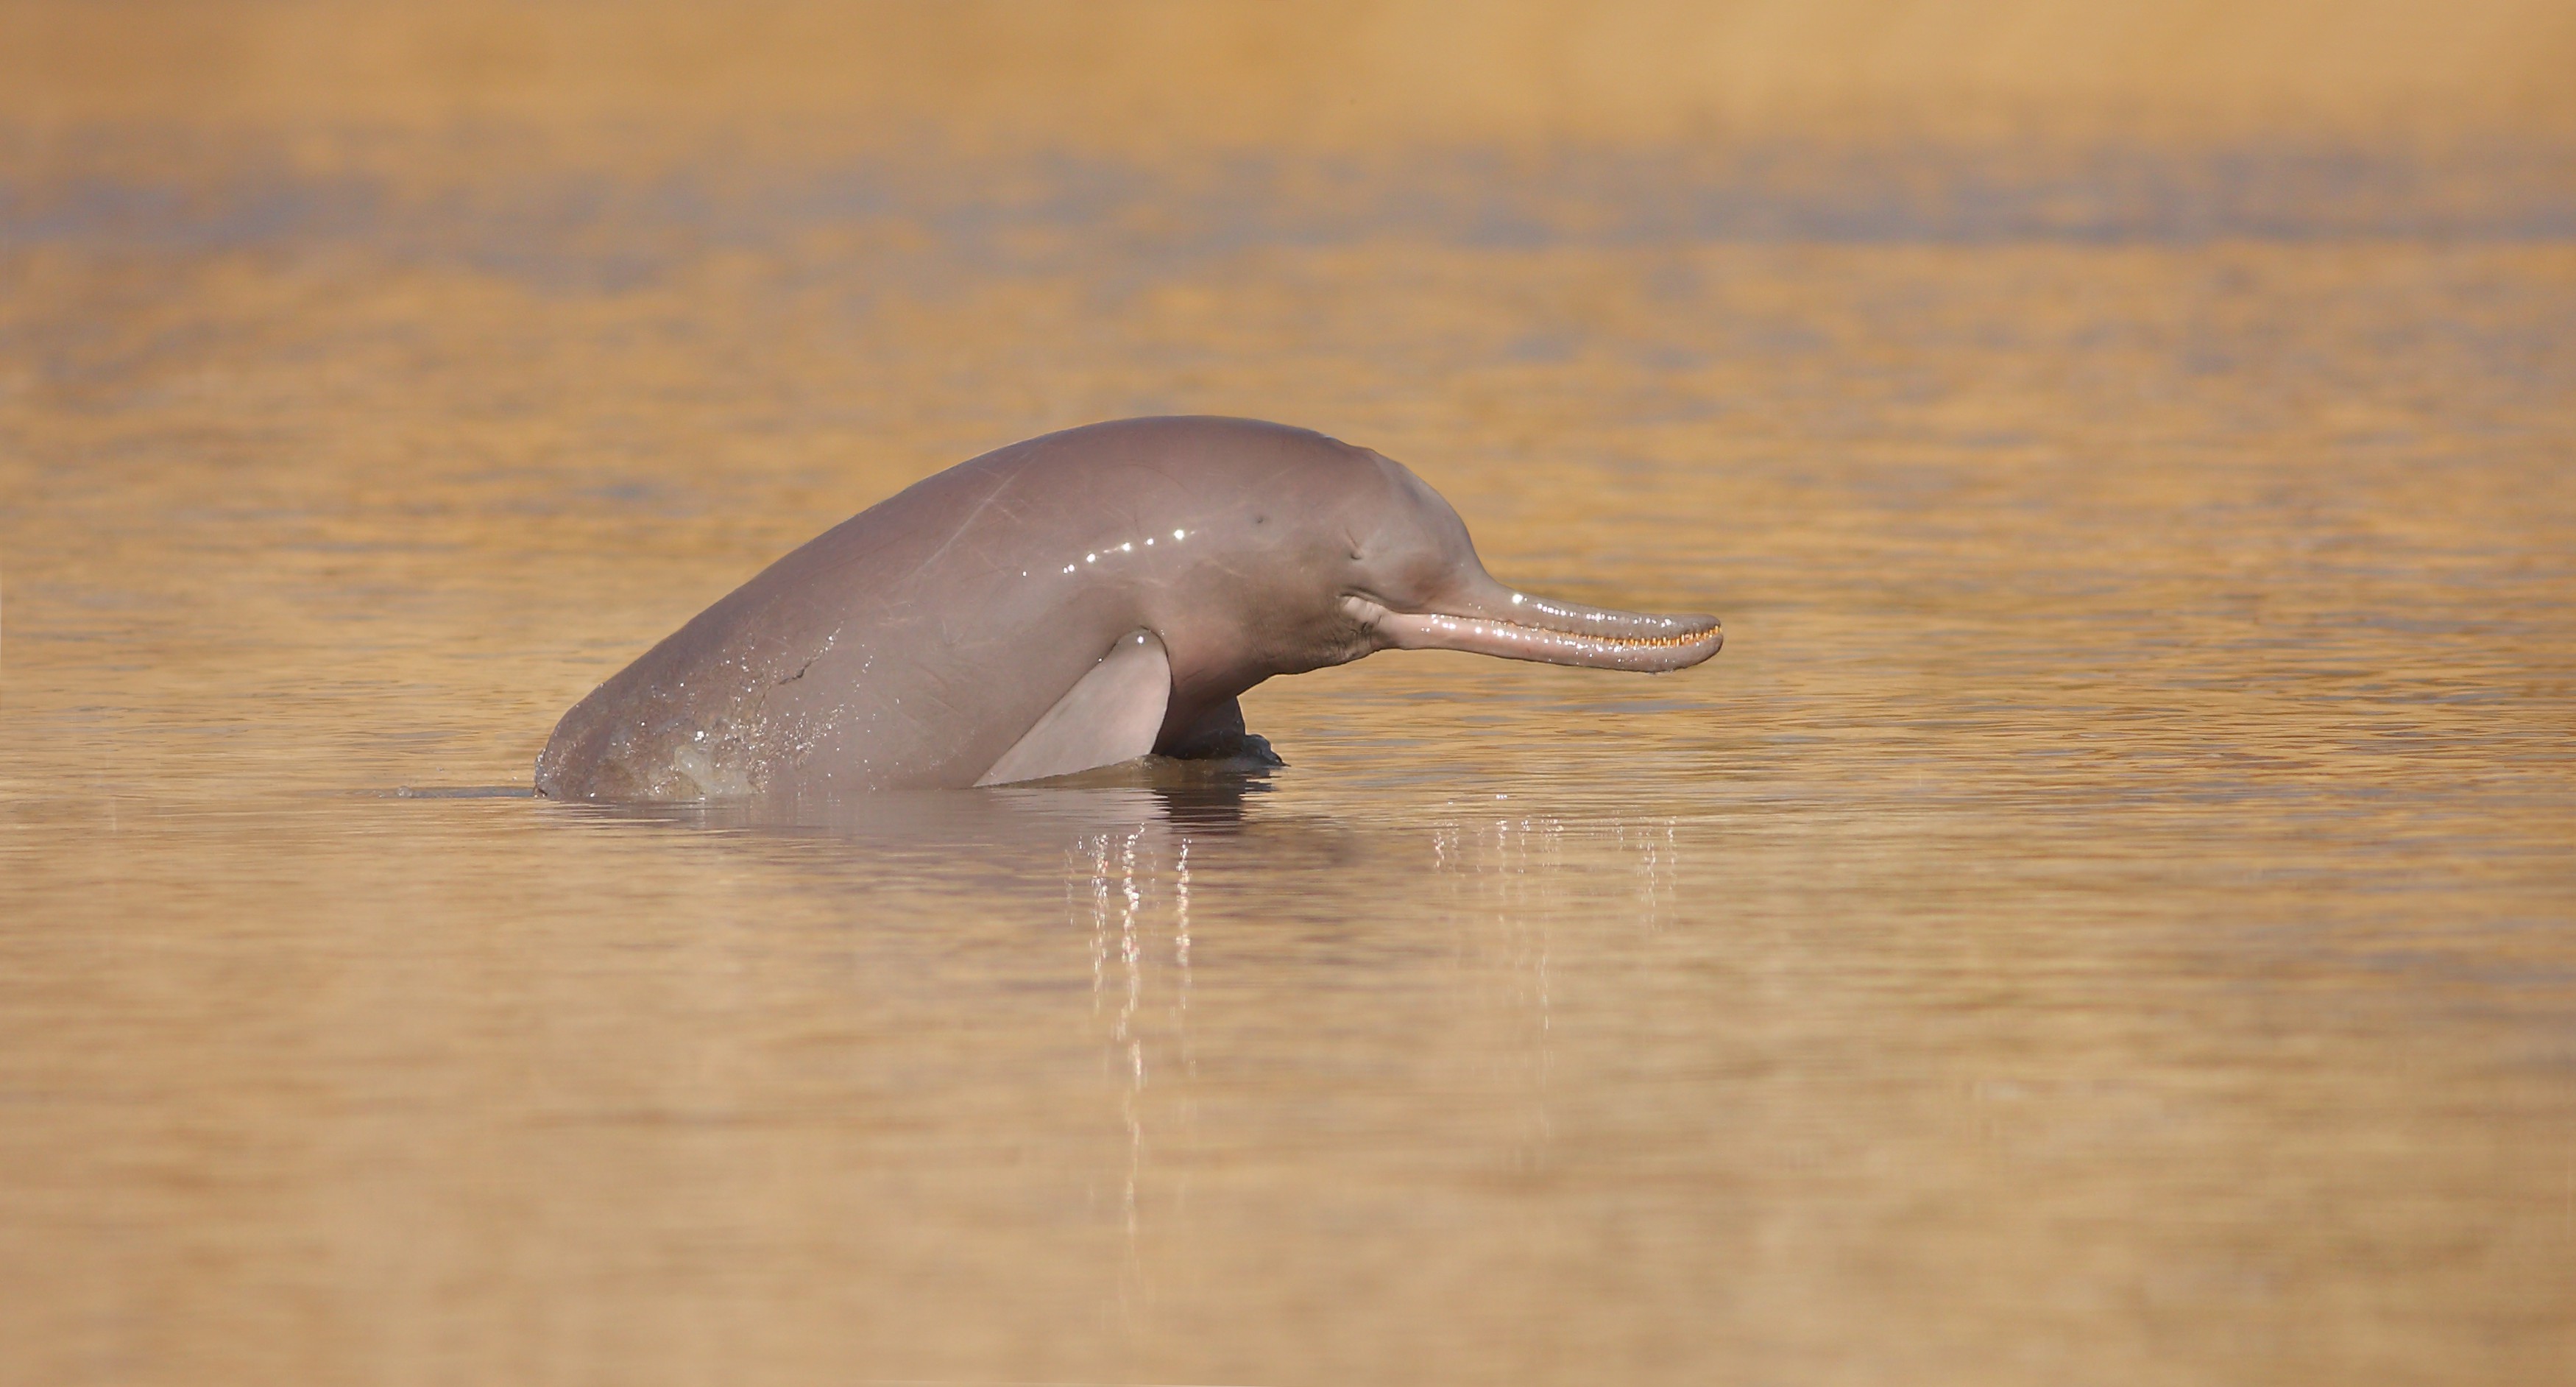 Is Indus River dolphin endangered?